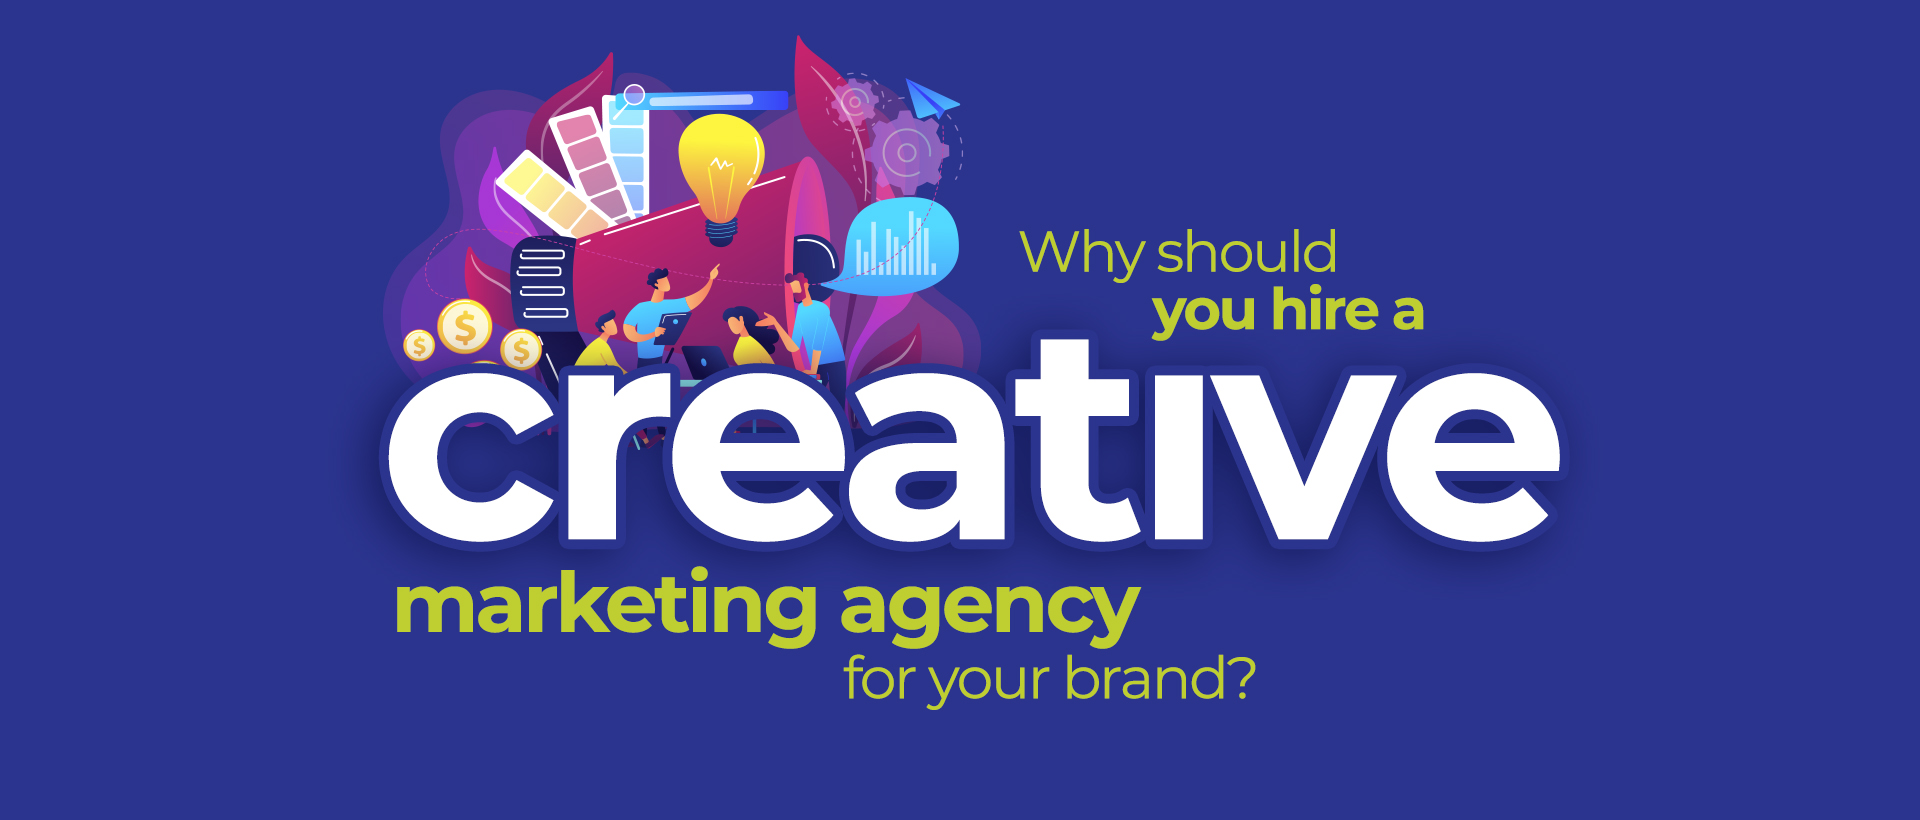 Why should you hire a creative marketing agency for your brand?